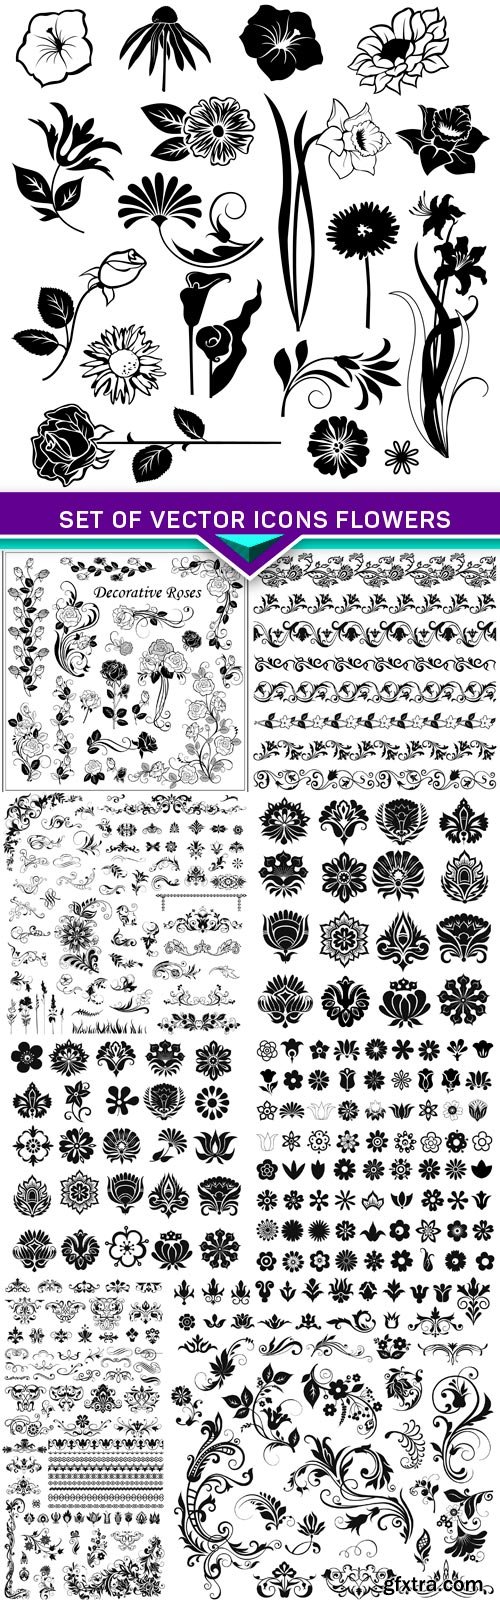 Set of vector icons flowers 10x EPS